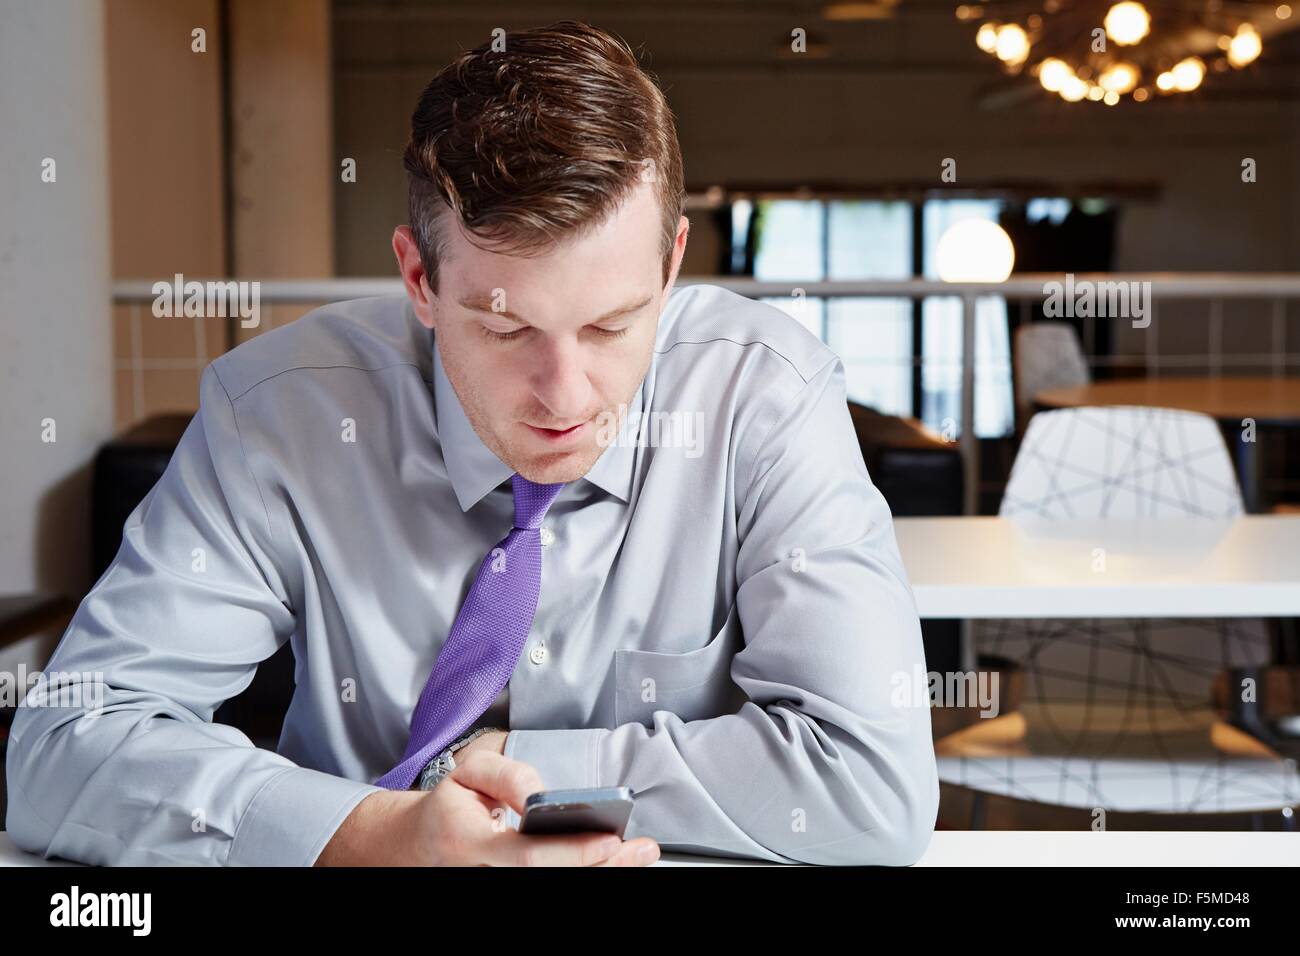 Mid adult businessman sitting at desk, looking at smartphone Stock Photo